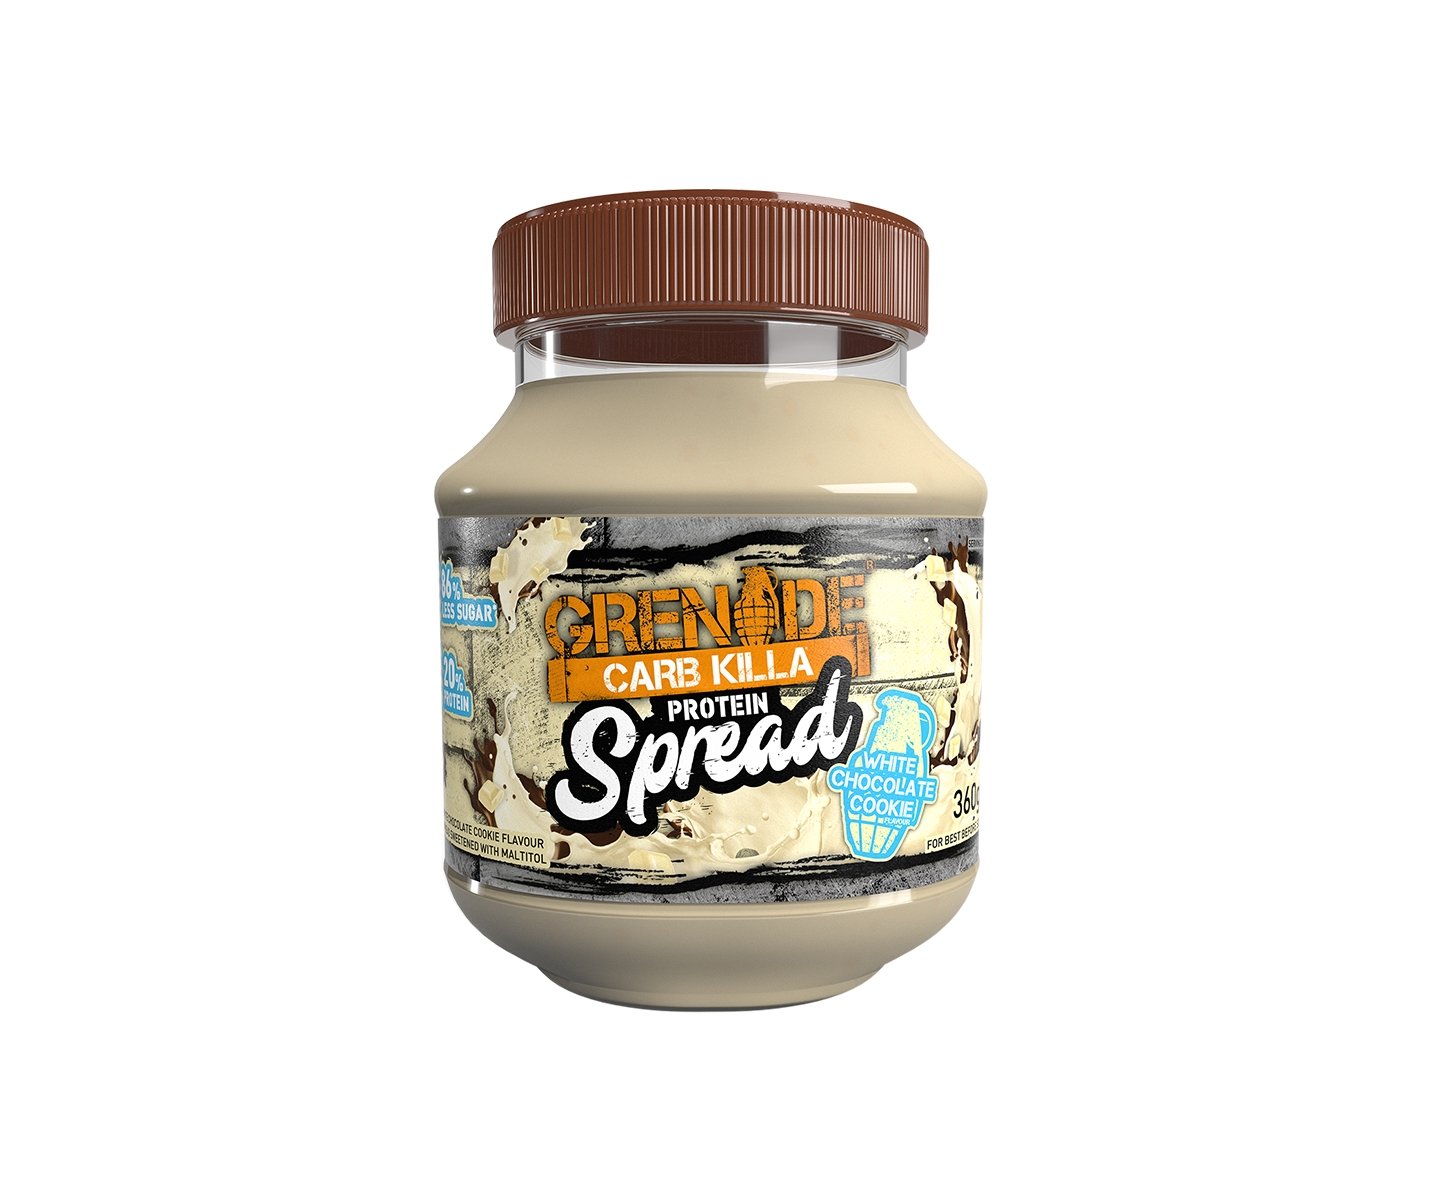 Protein Chocolate Spreads - Grenade Carb Killa Bar σε ένα βάζο Spreads - theskinnyfoodco